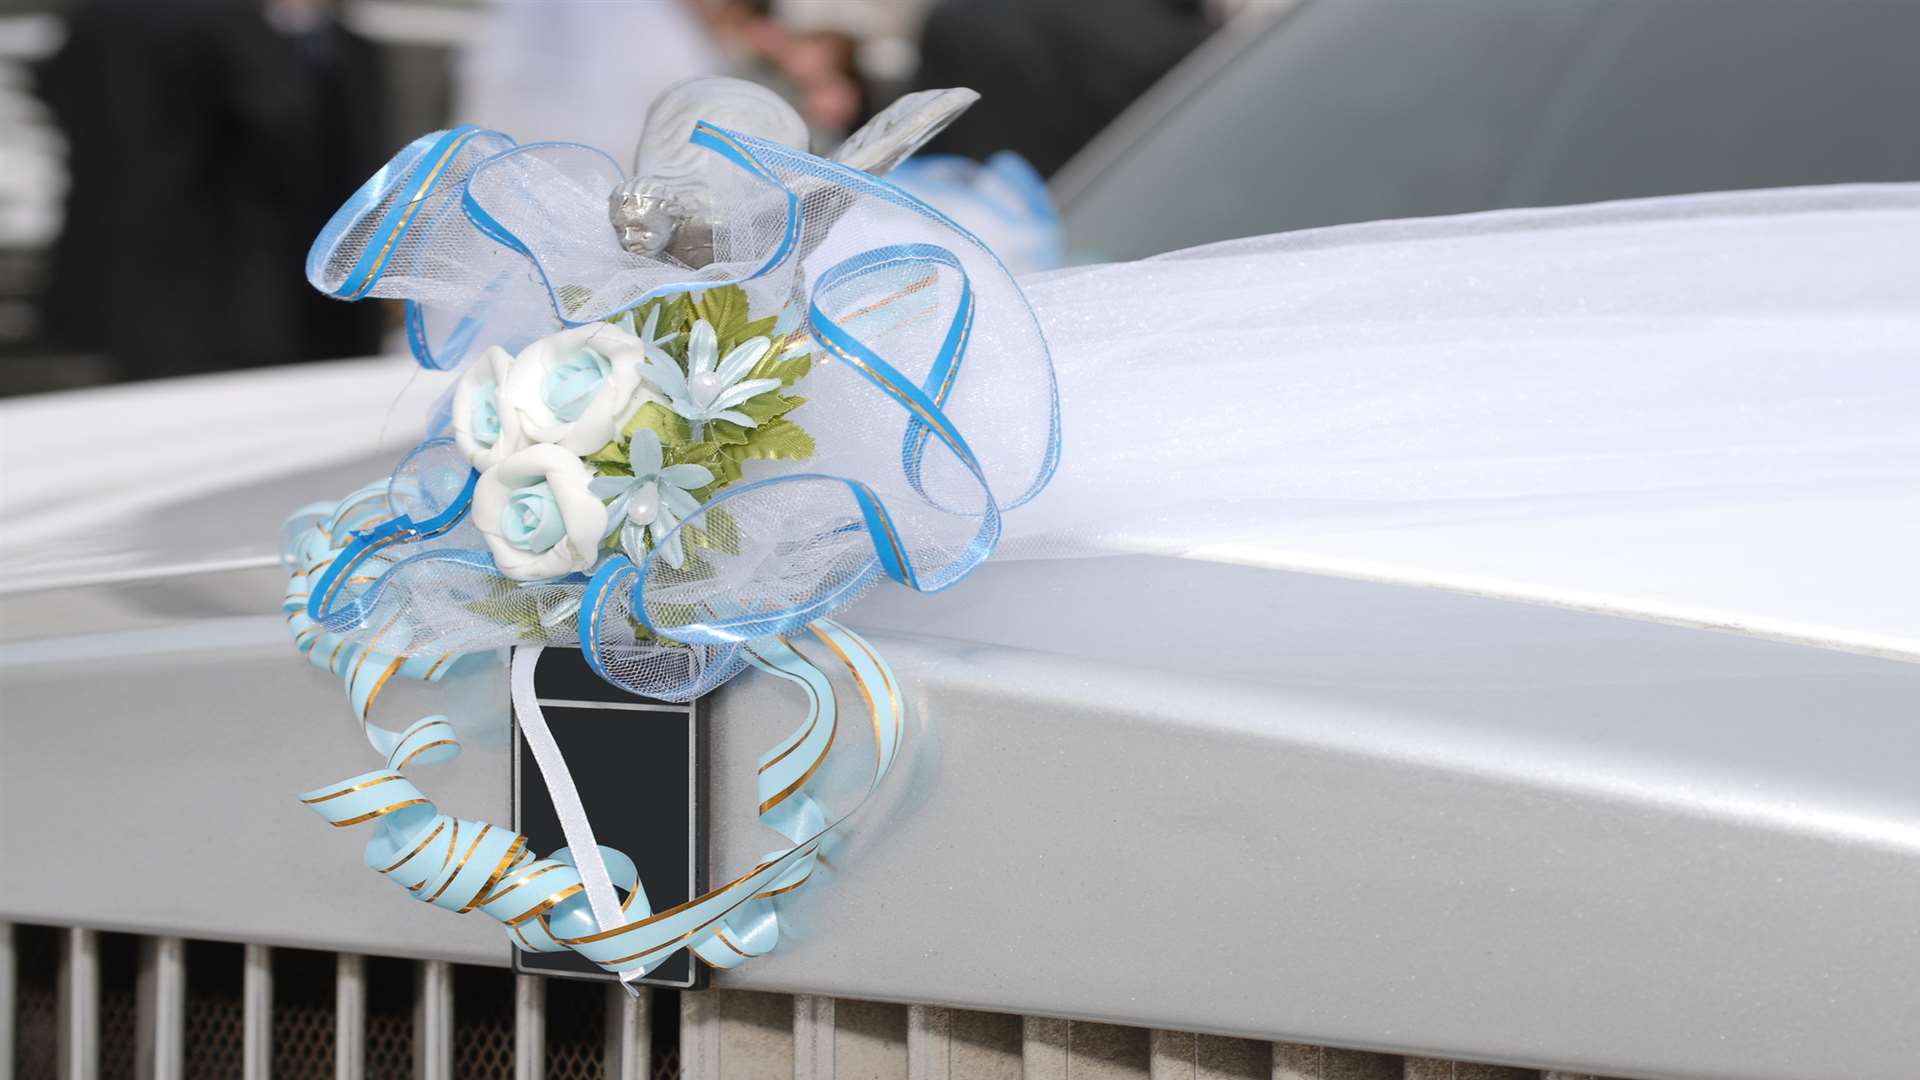 Decoration on the outside of cars, often using satin ribbon, remains popular